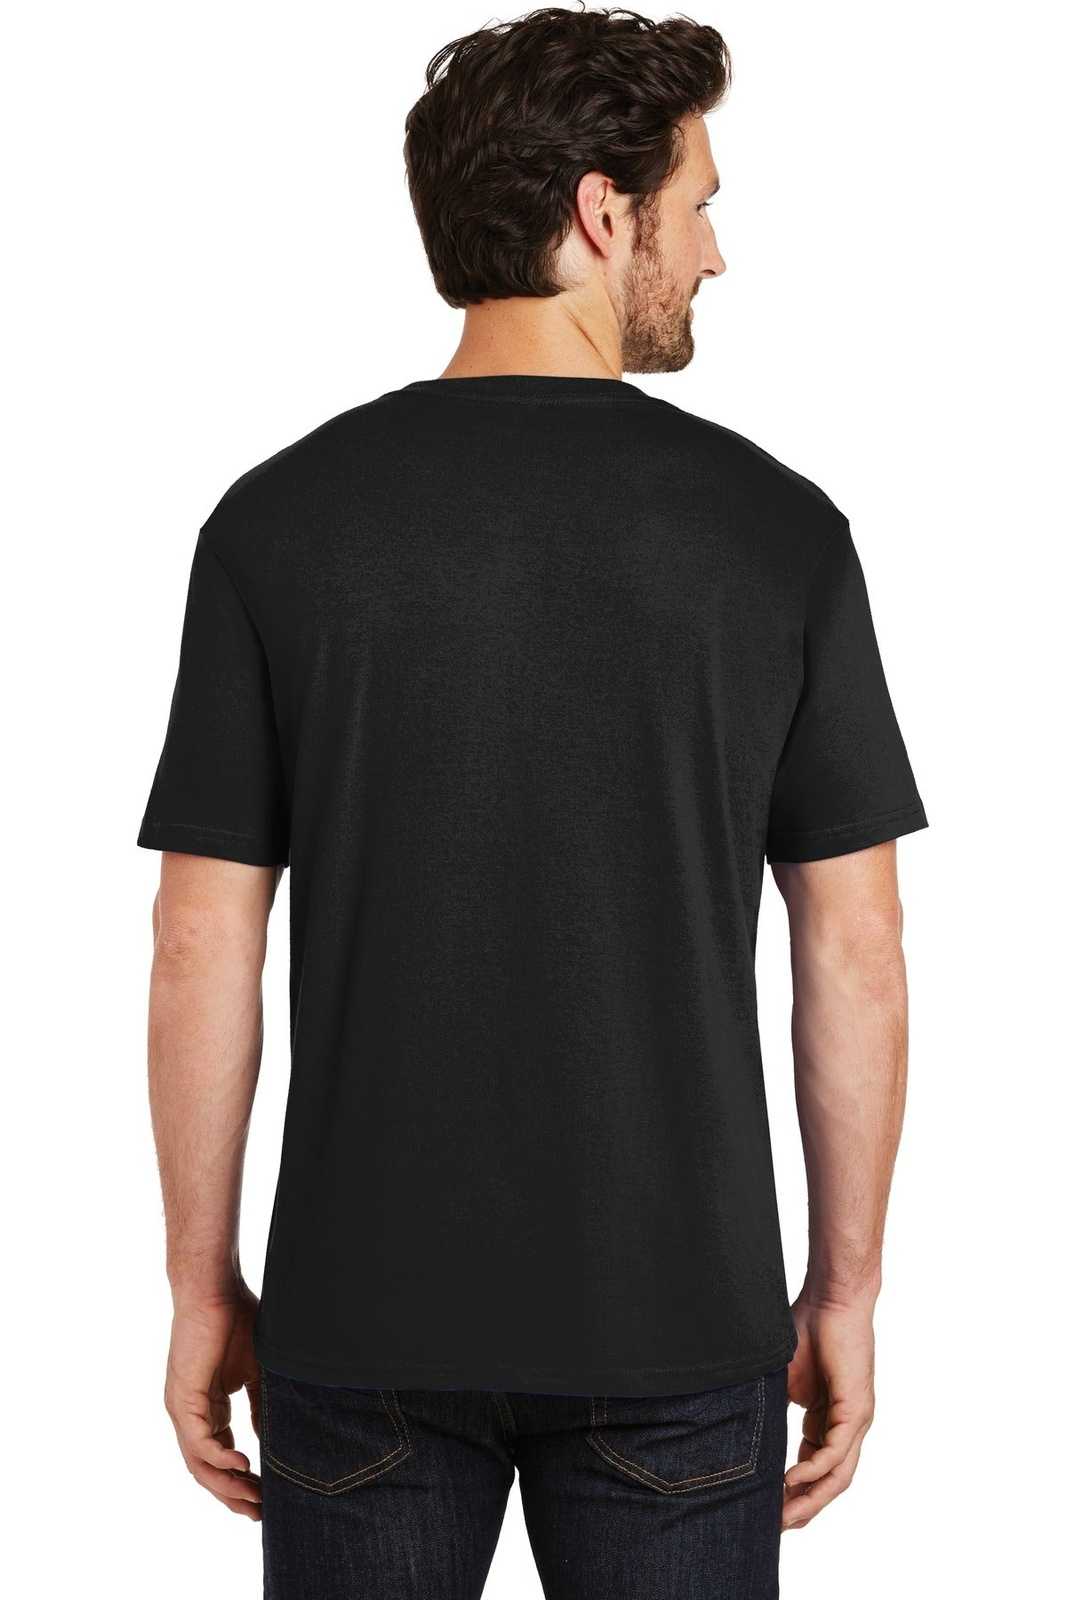 District DT104 Perfect Weight Tee - Jet Black - HIT a Double - 1